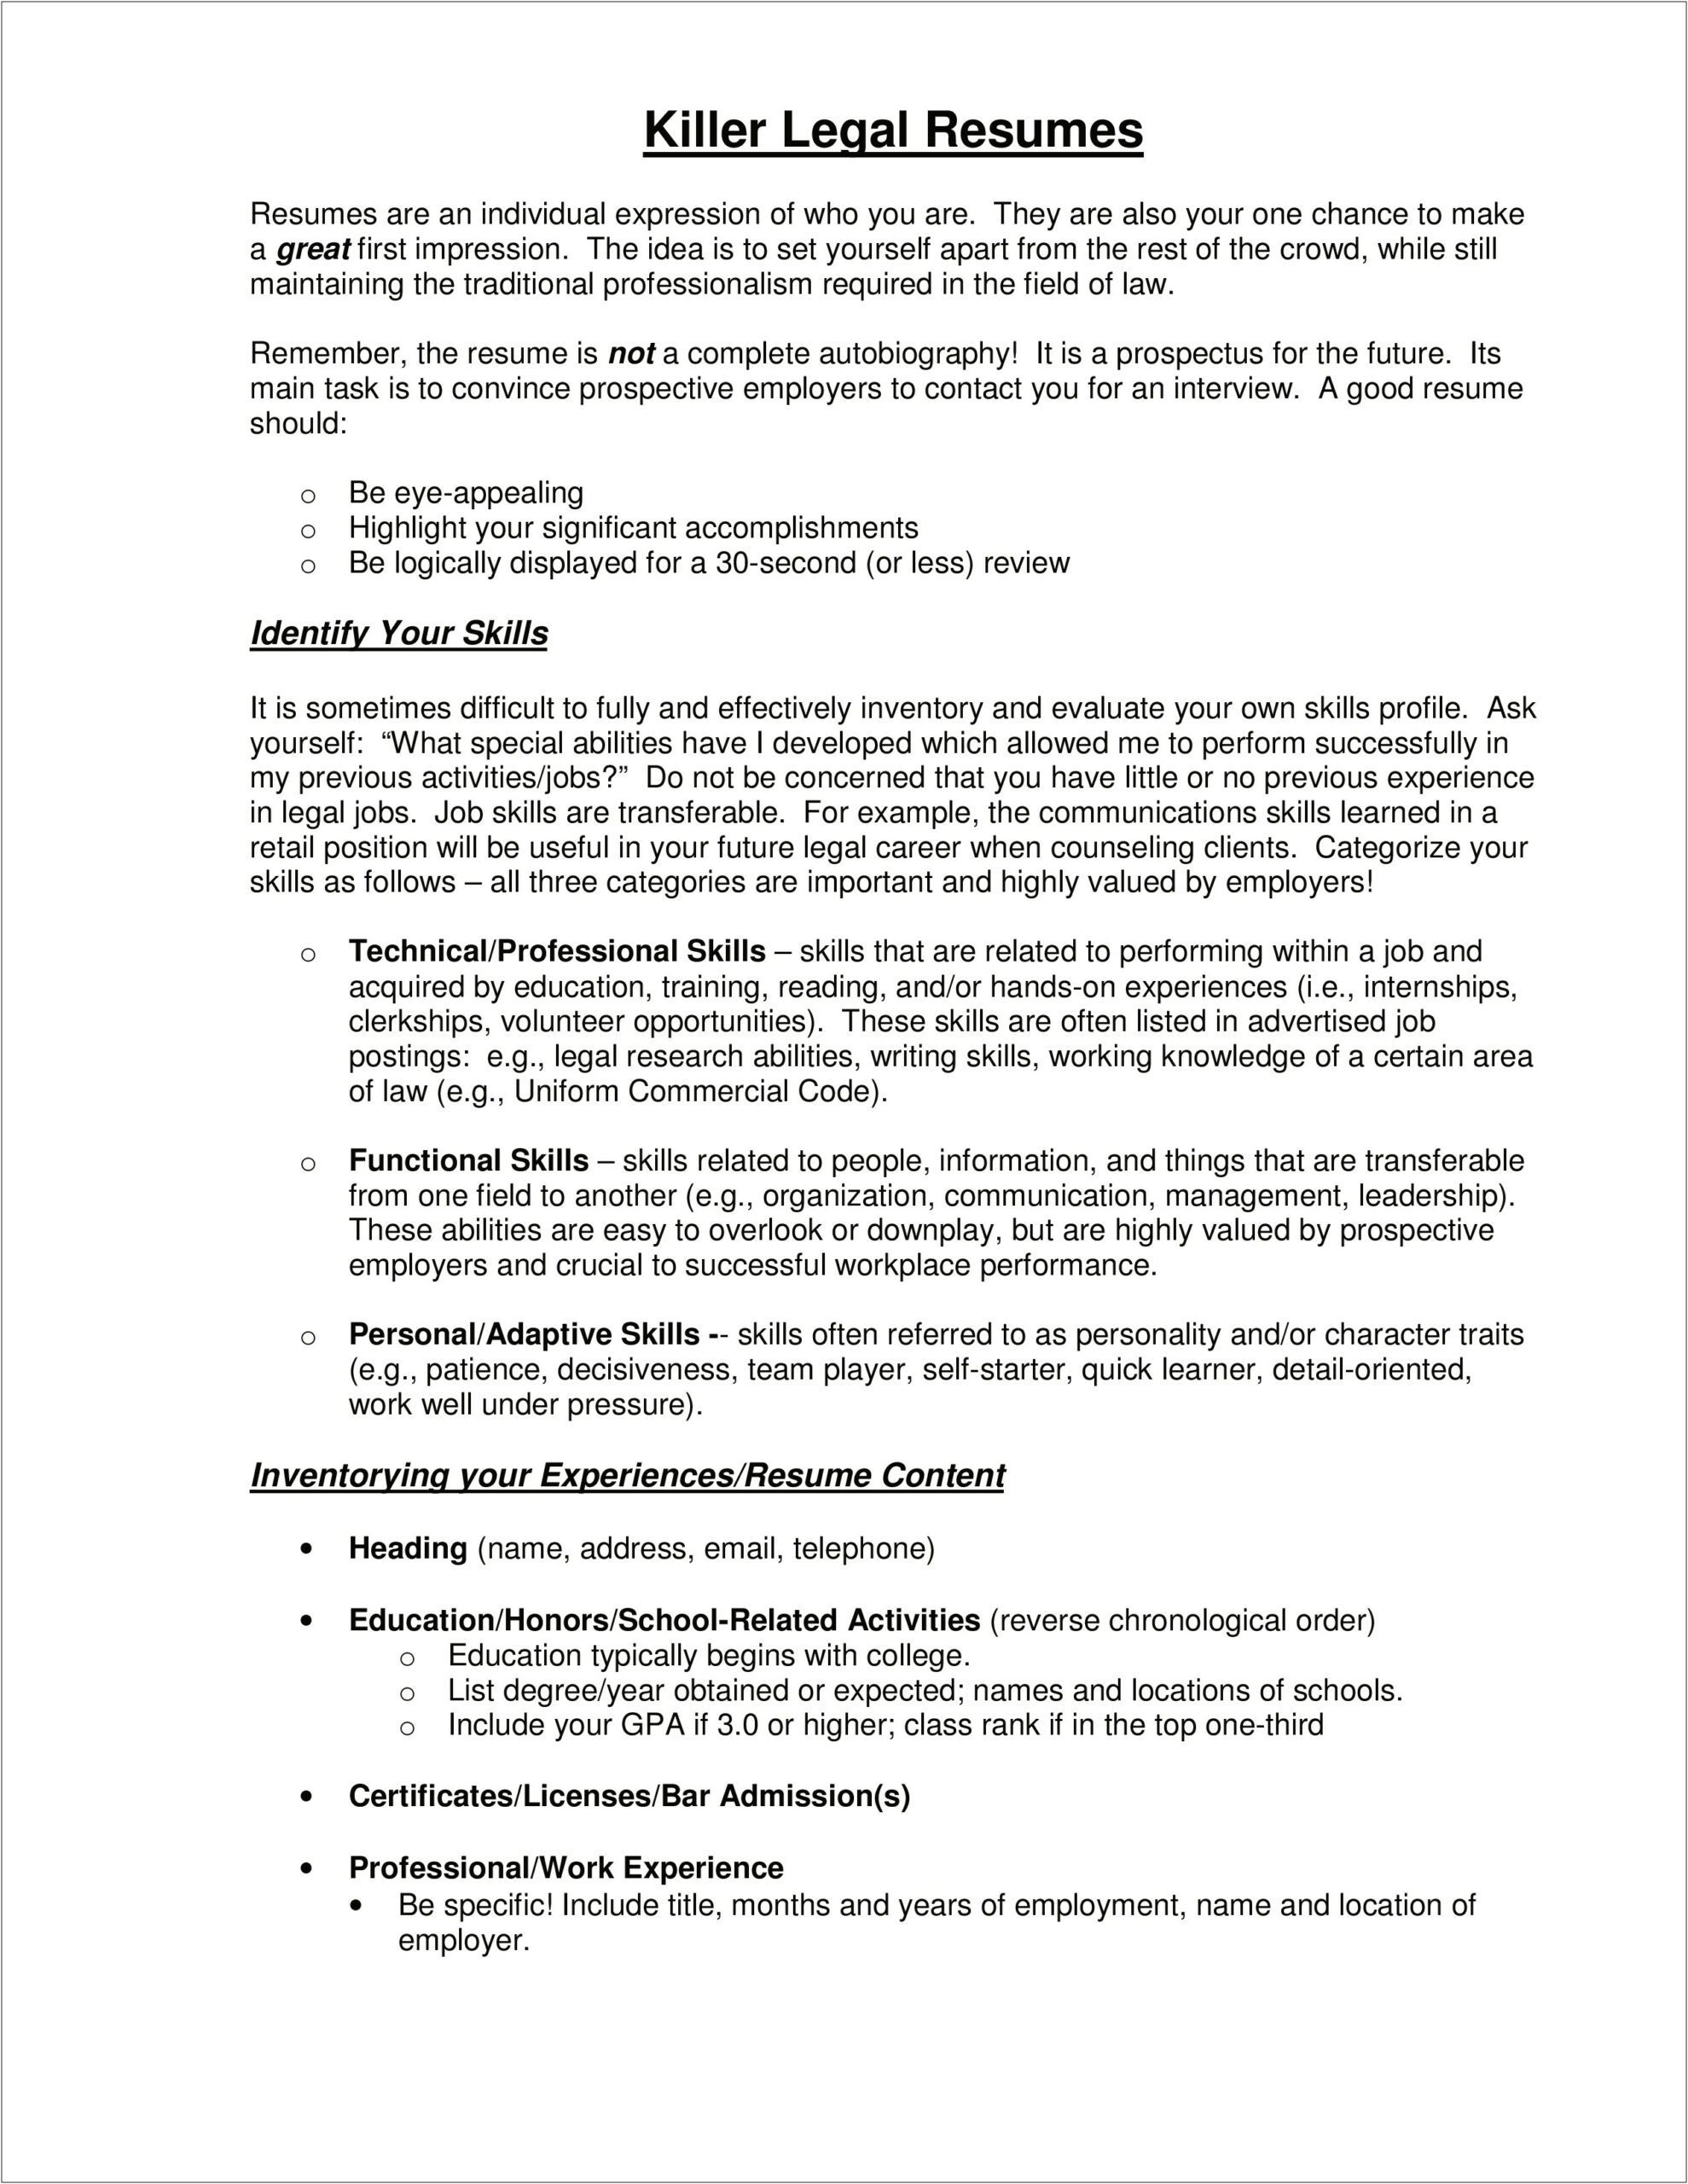 Where To Put Law Review On A Resume